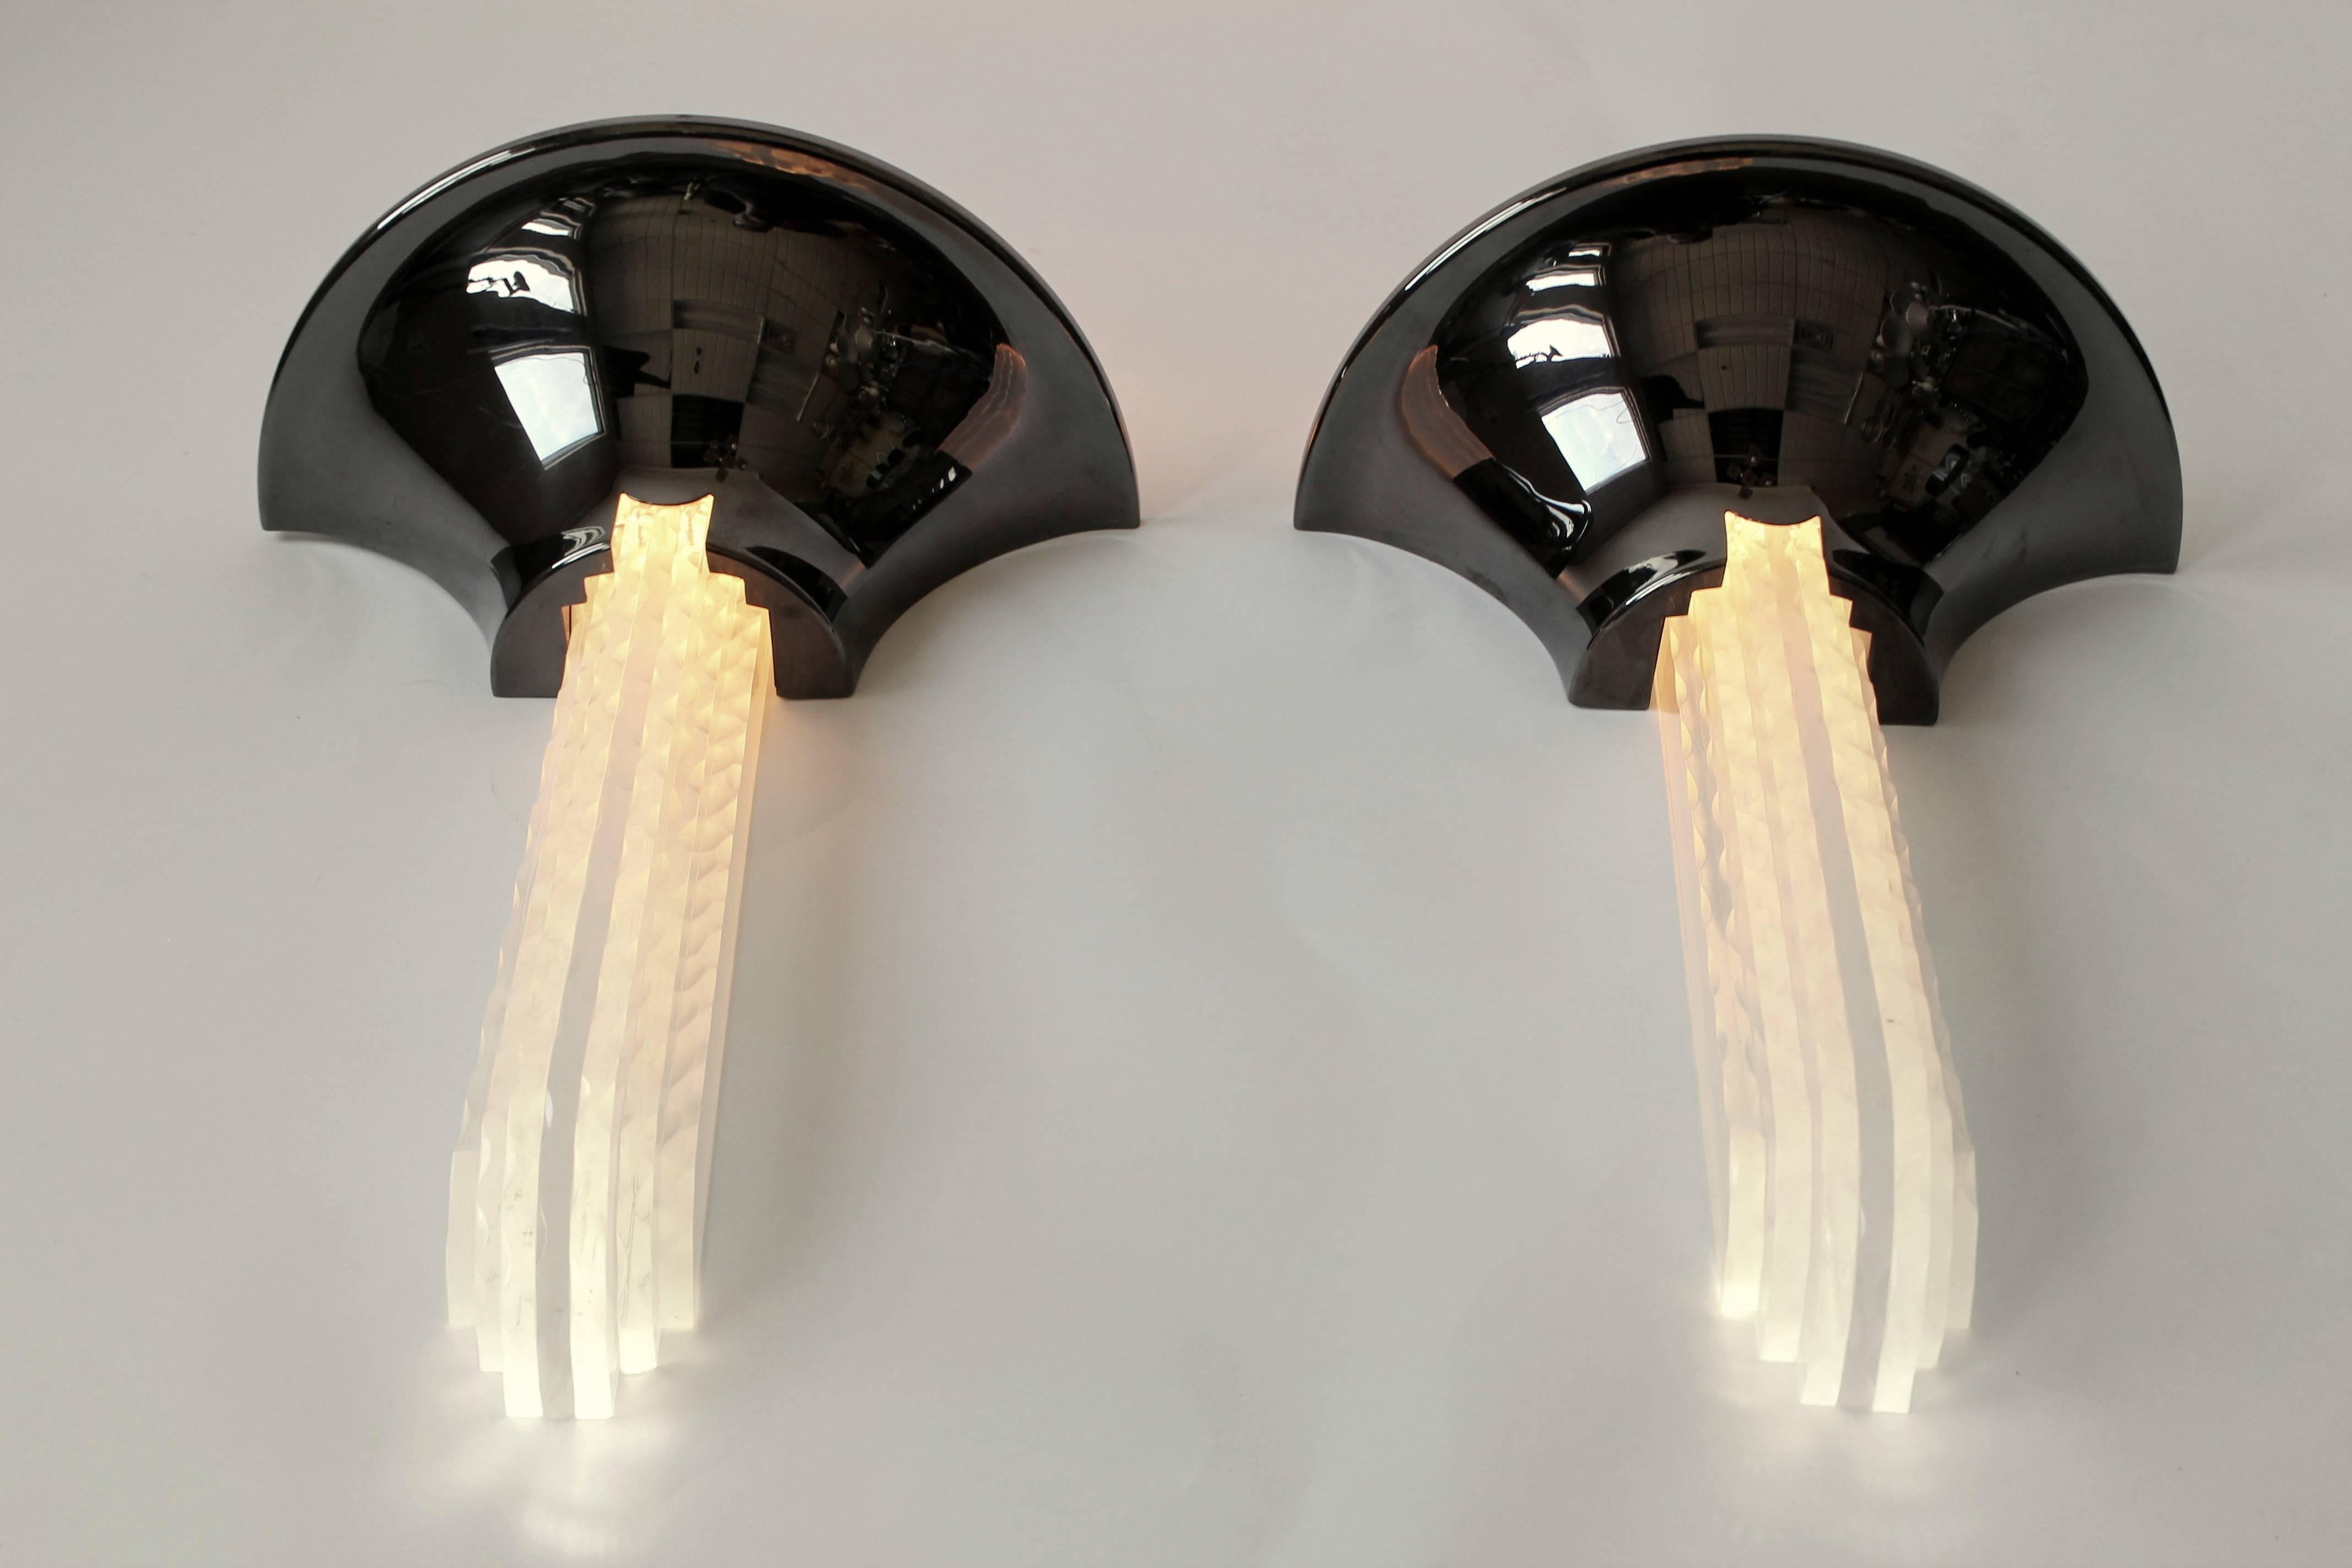 Art Deco Massive Pair of Karl Springer Purcell  Sconces in Gun Metal finish , 1970s , USA For Sale